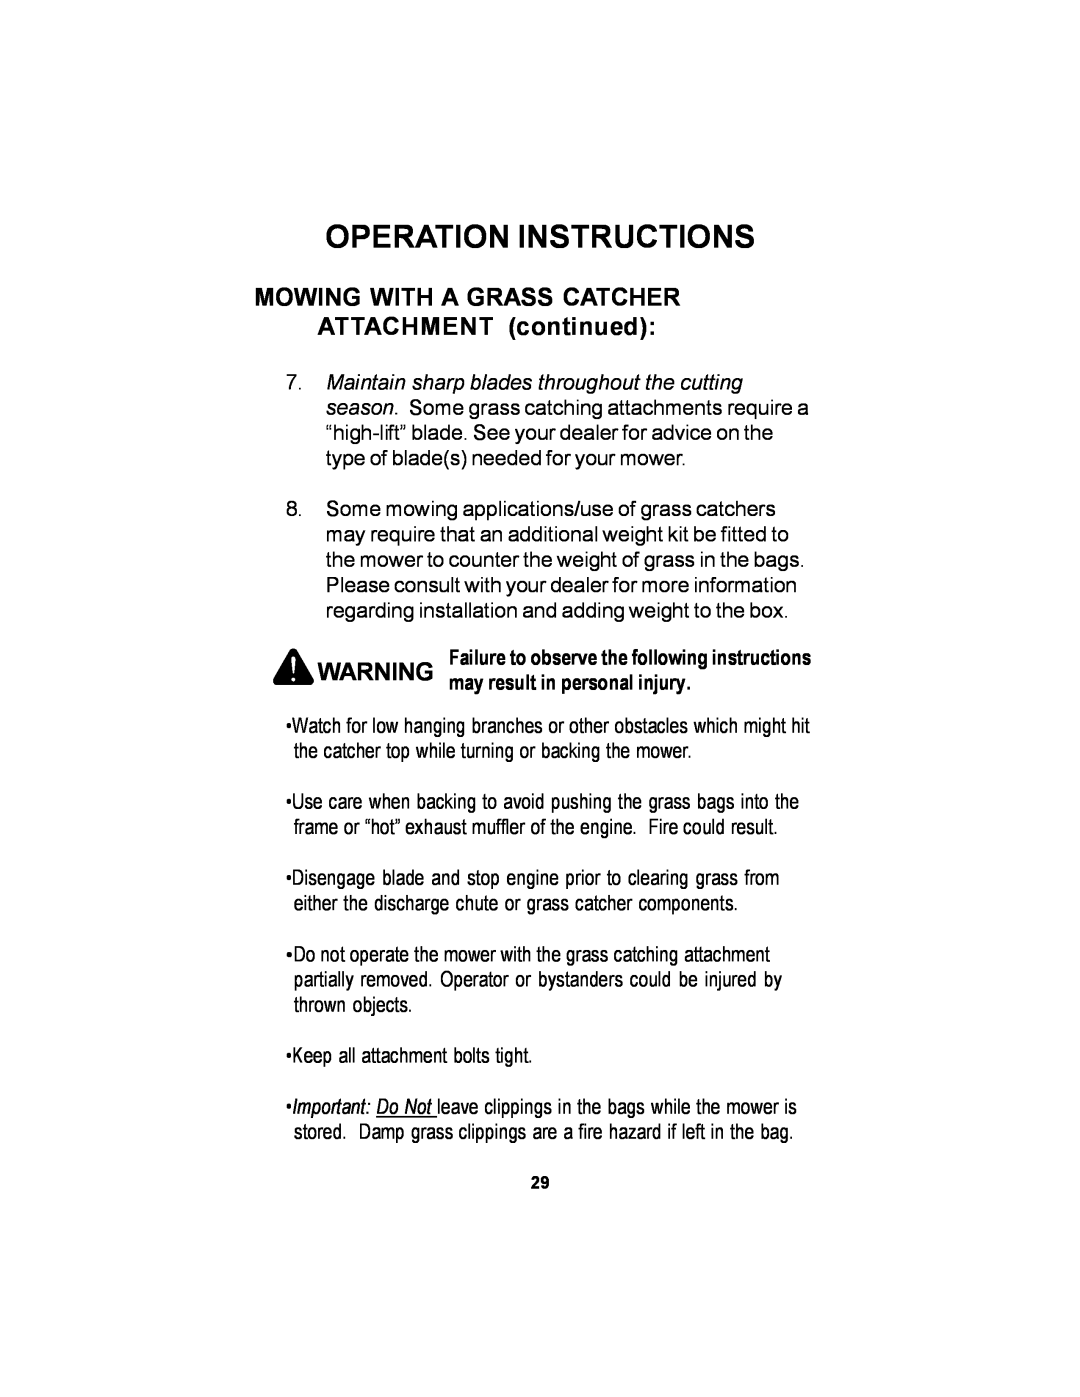 Dixon 14295-1005 manual MOWING WITH A GRASS CATCHER ATTACHMENT continued, Operation Instructions 